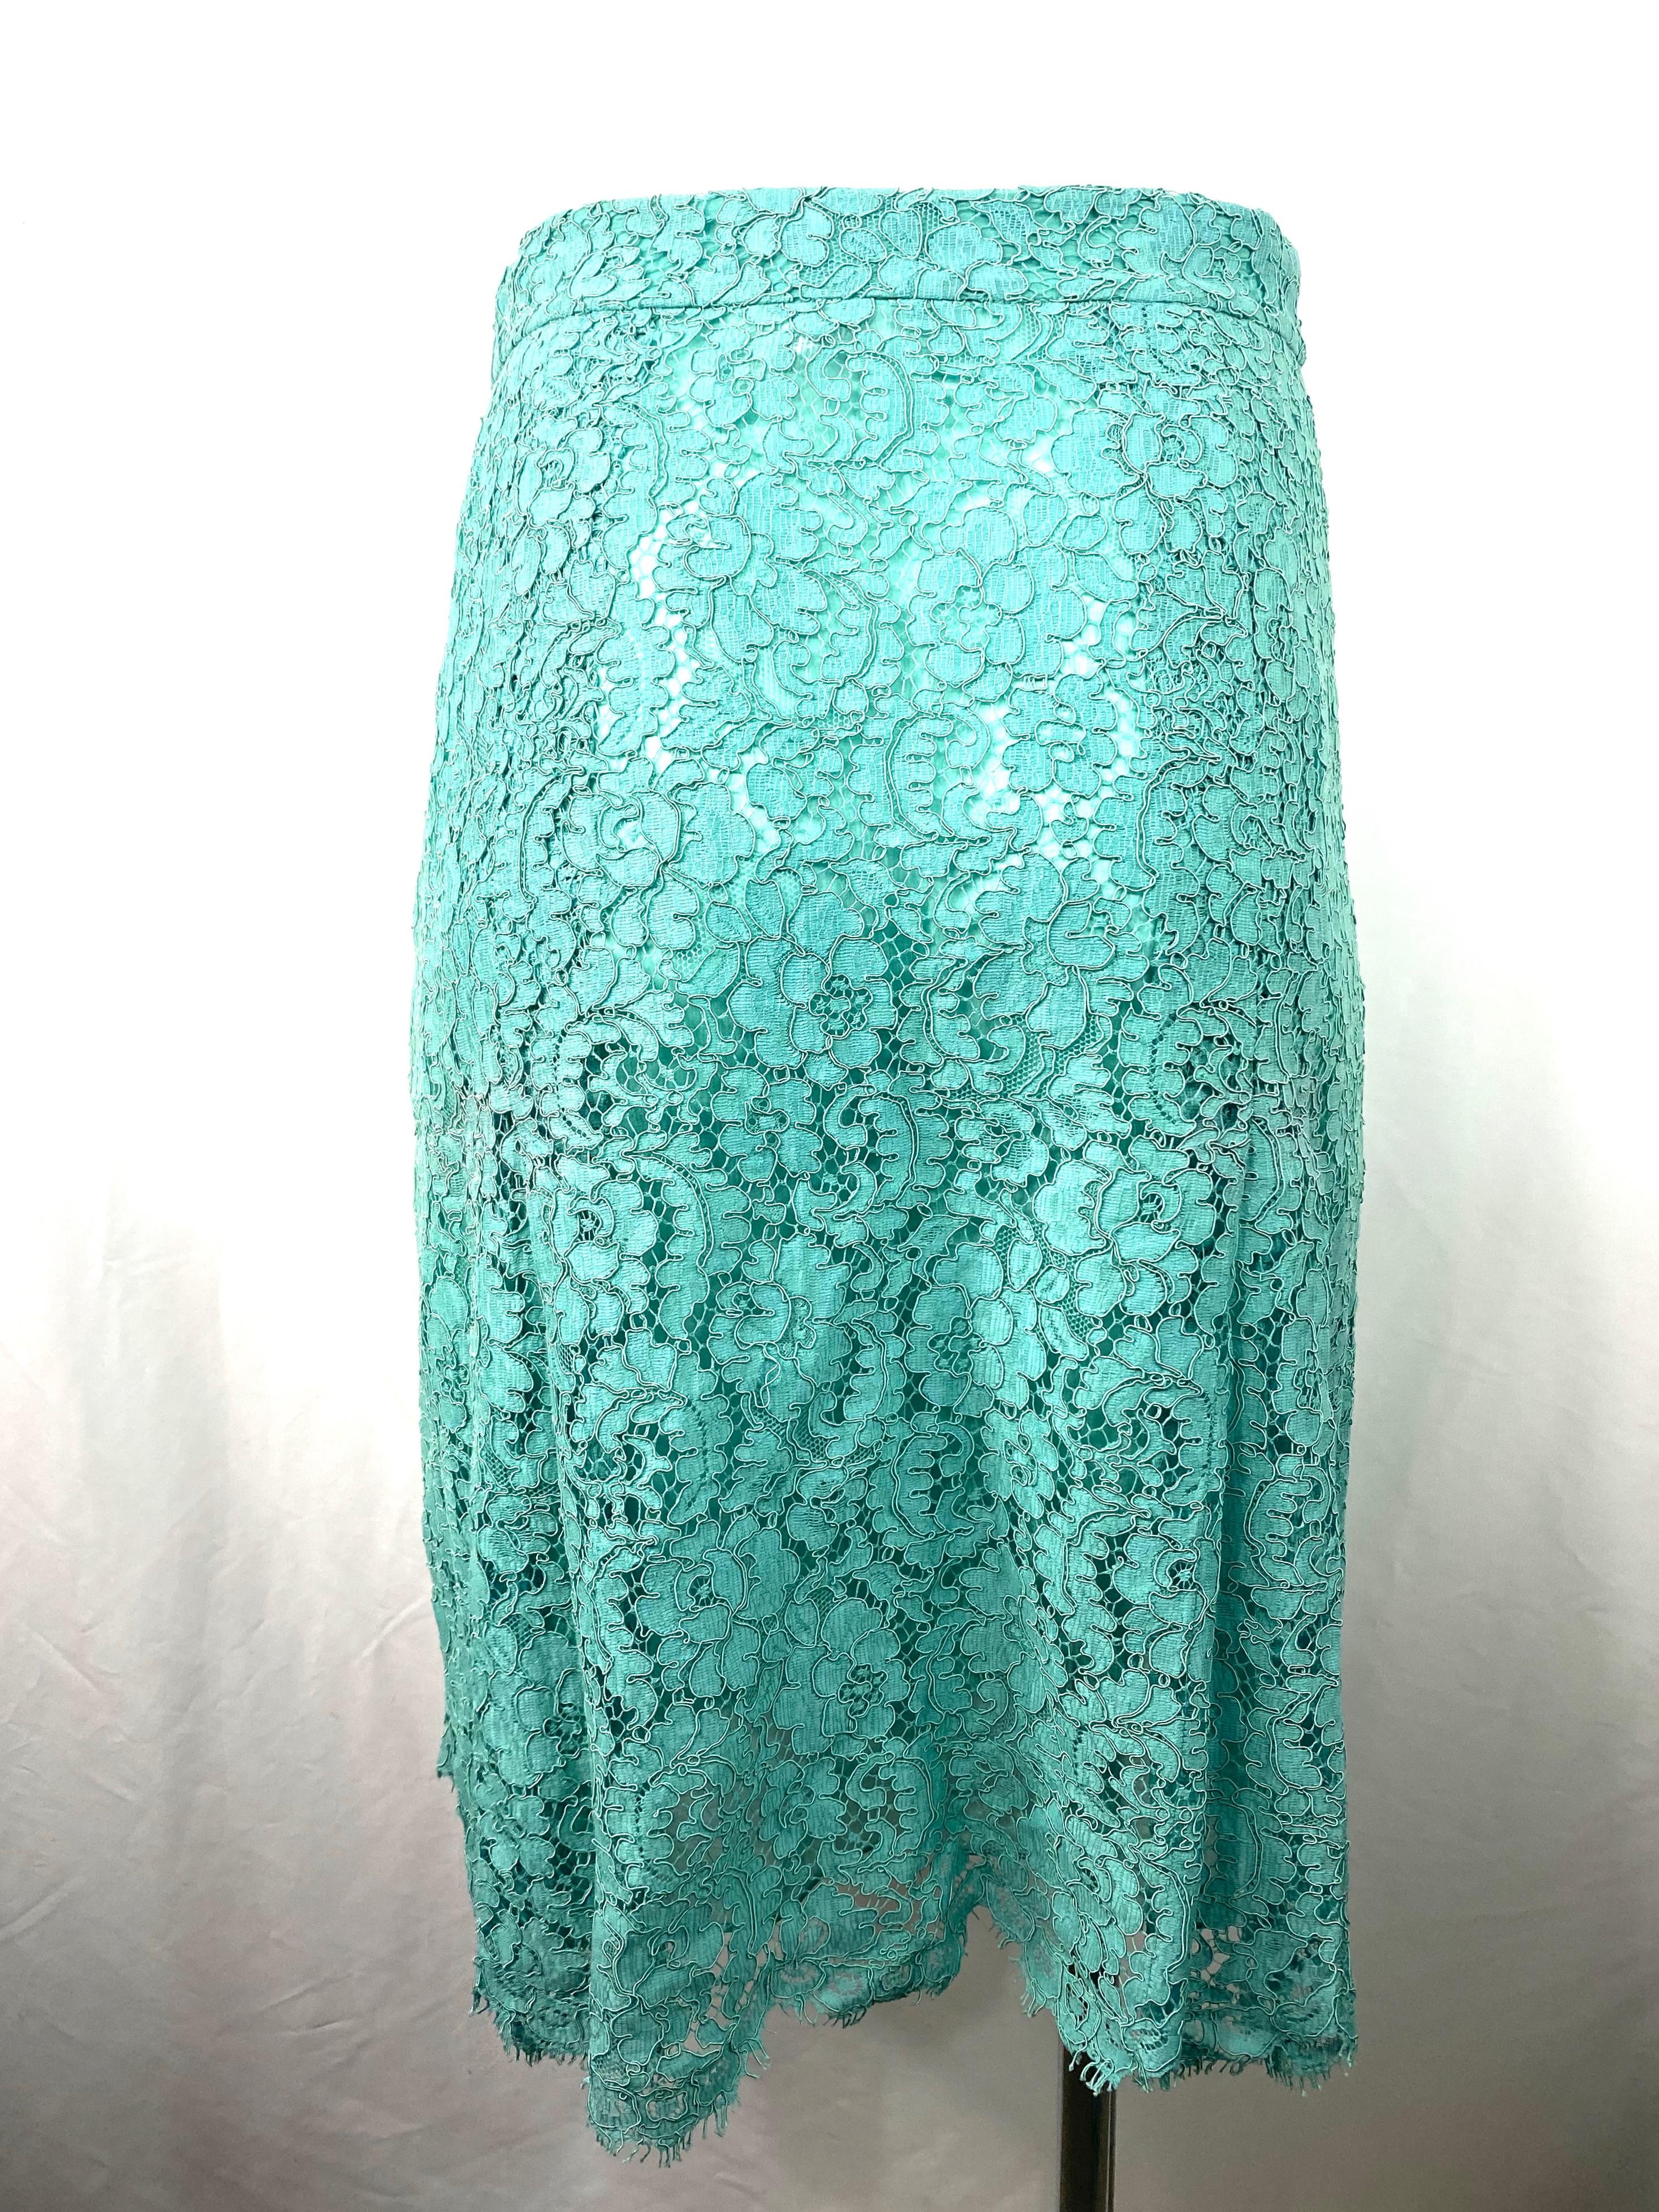 Chanel Turquoise Floral Lace Top and Skirt Set Size 40 For Sale 4